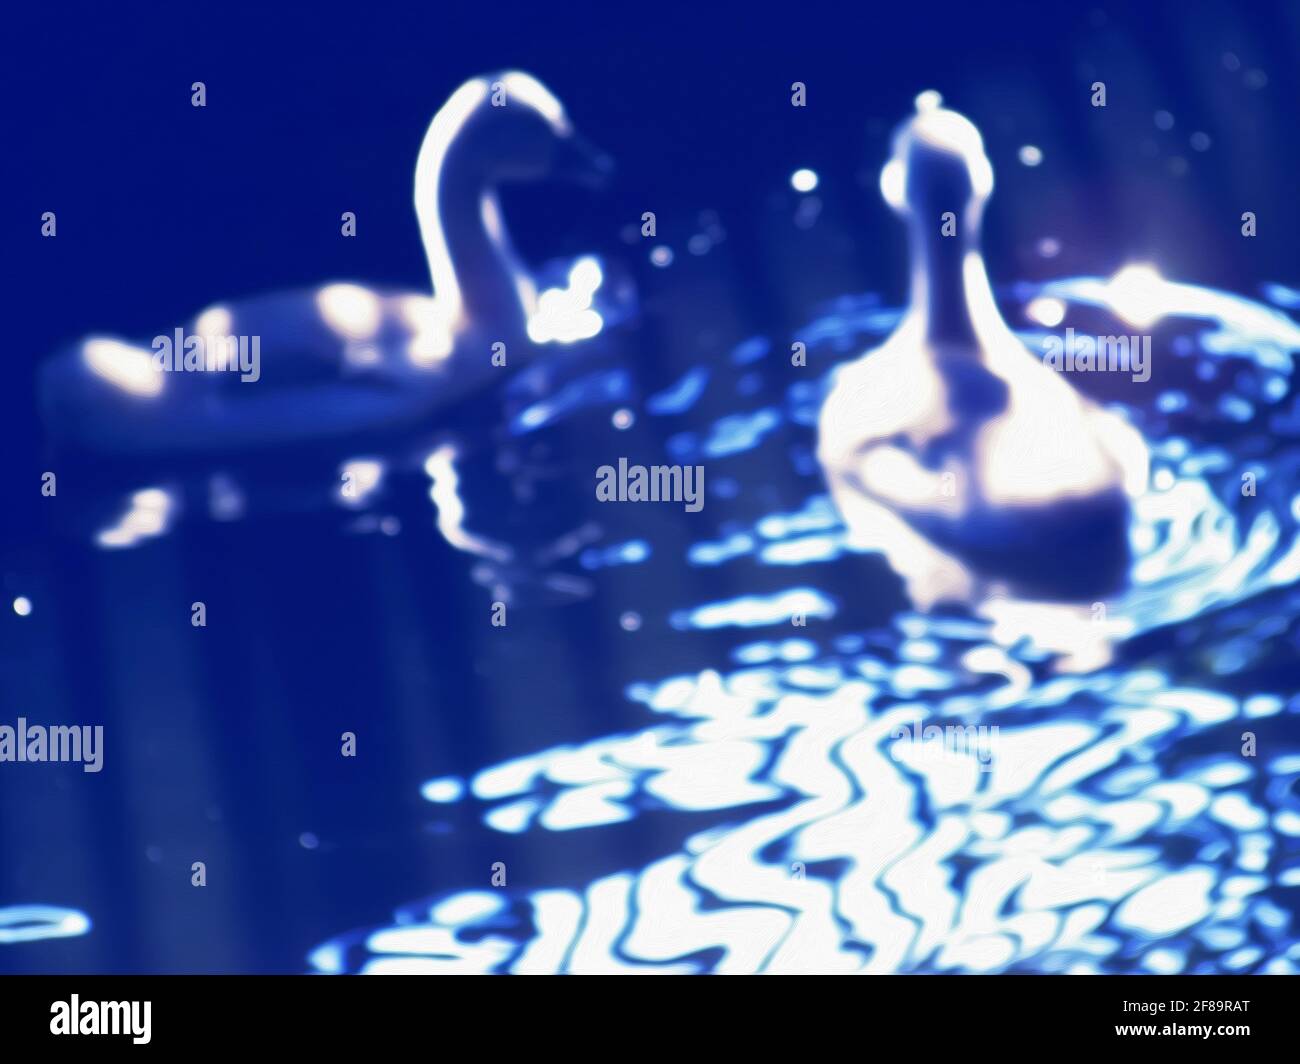 Two small goslings floating on the water surface, blurring and structured artistic pattern in vivid blue hues Stock Photo